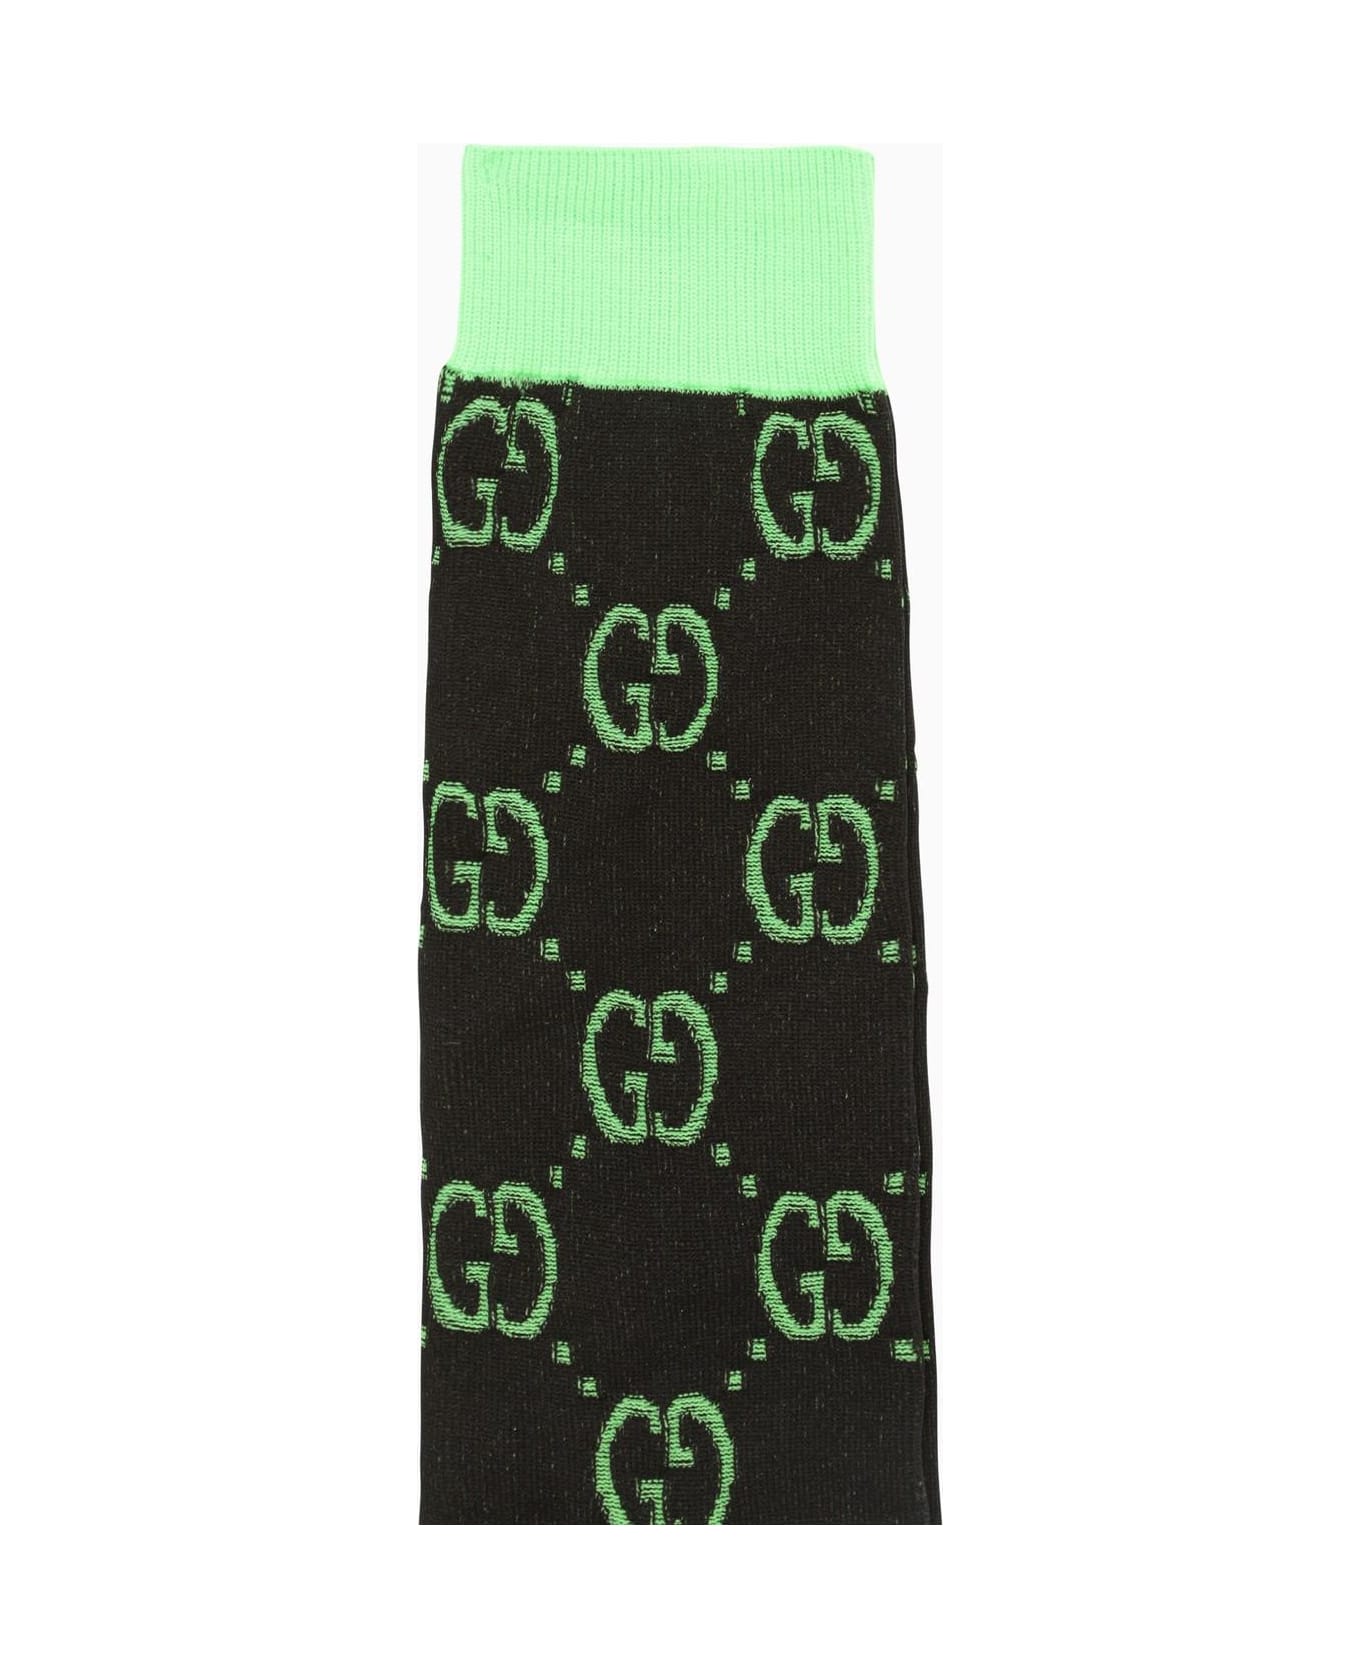 Gucci Black And Green Socks With Gg Motif - Green